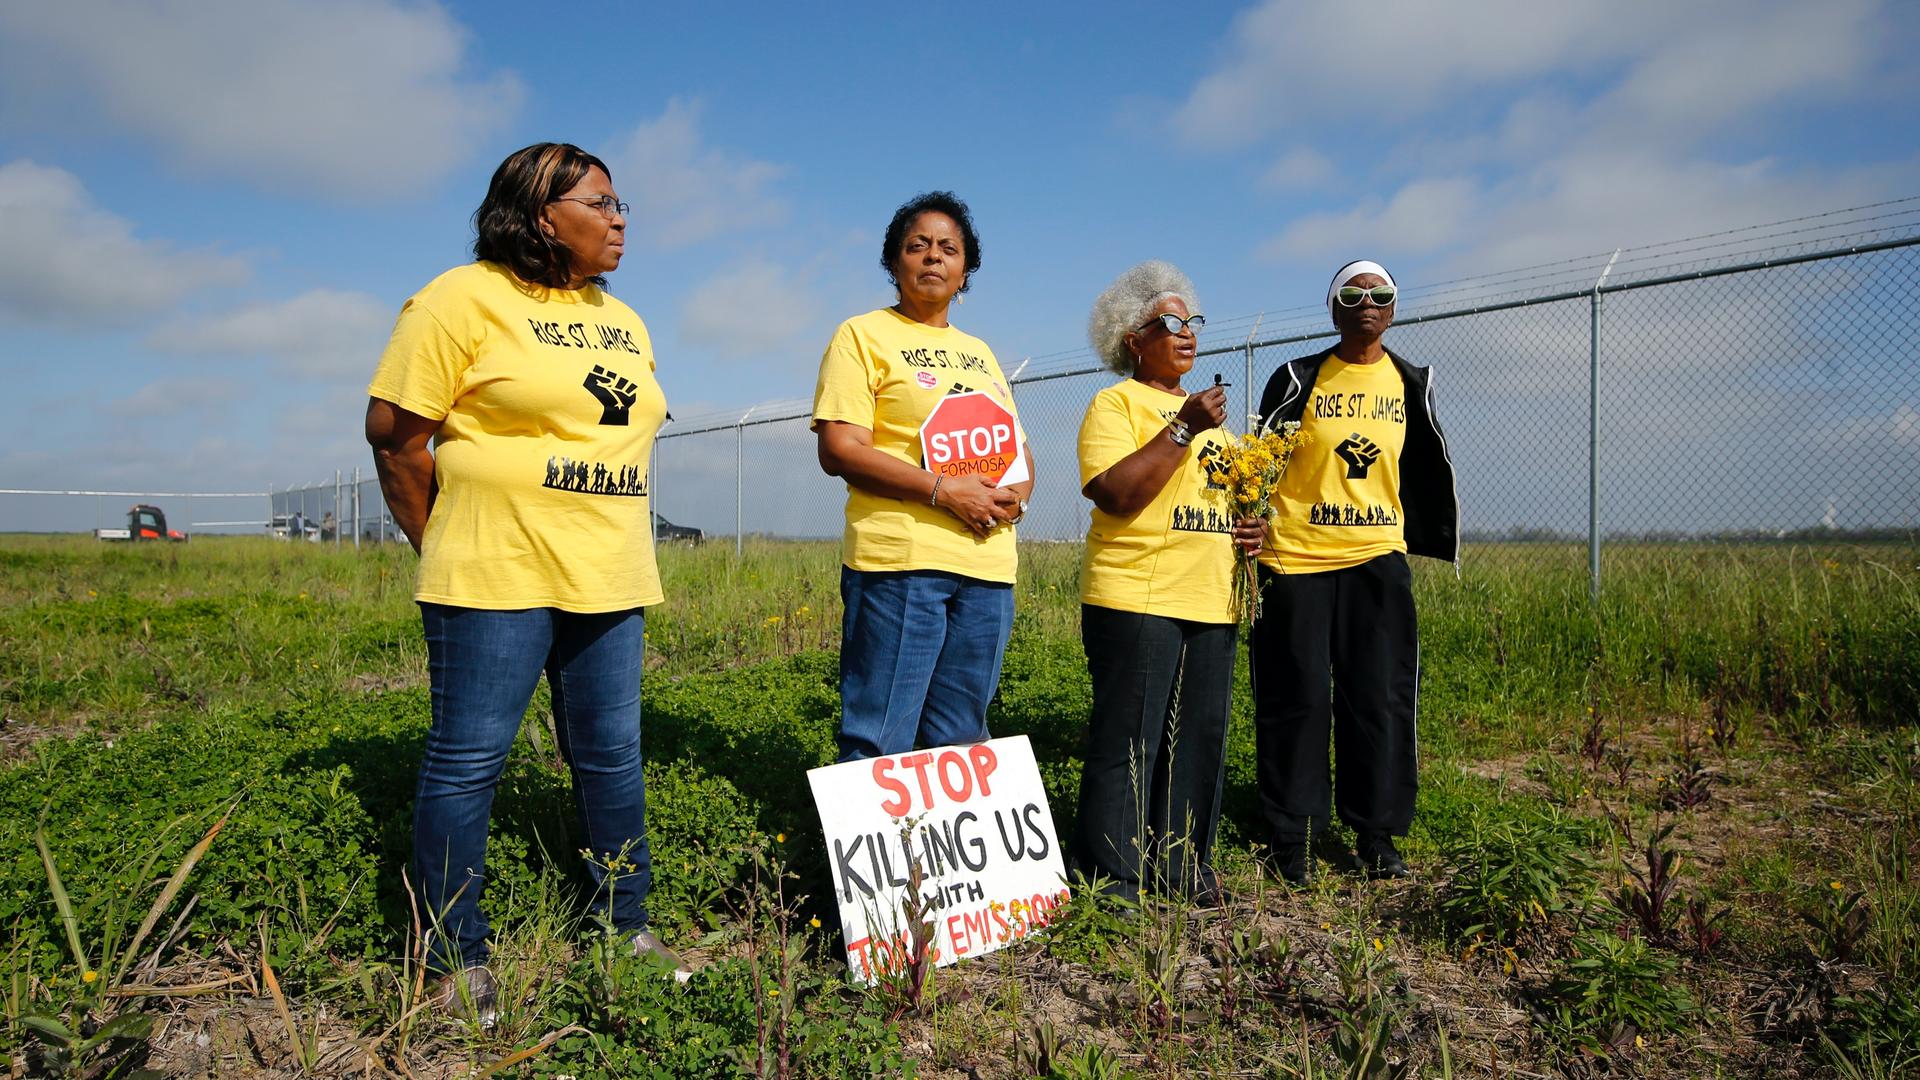 Four Black American women activists wearing yellow shirts and holding protest signs stand in a field near a fence. 